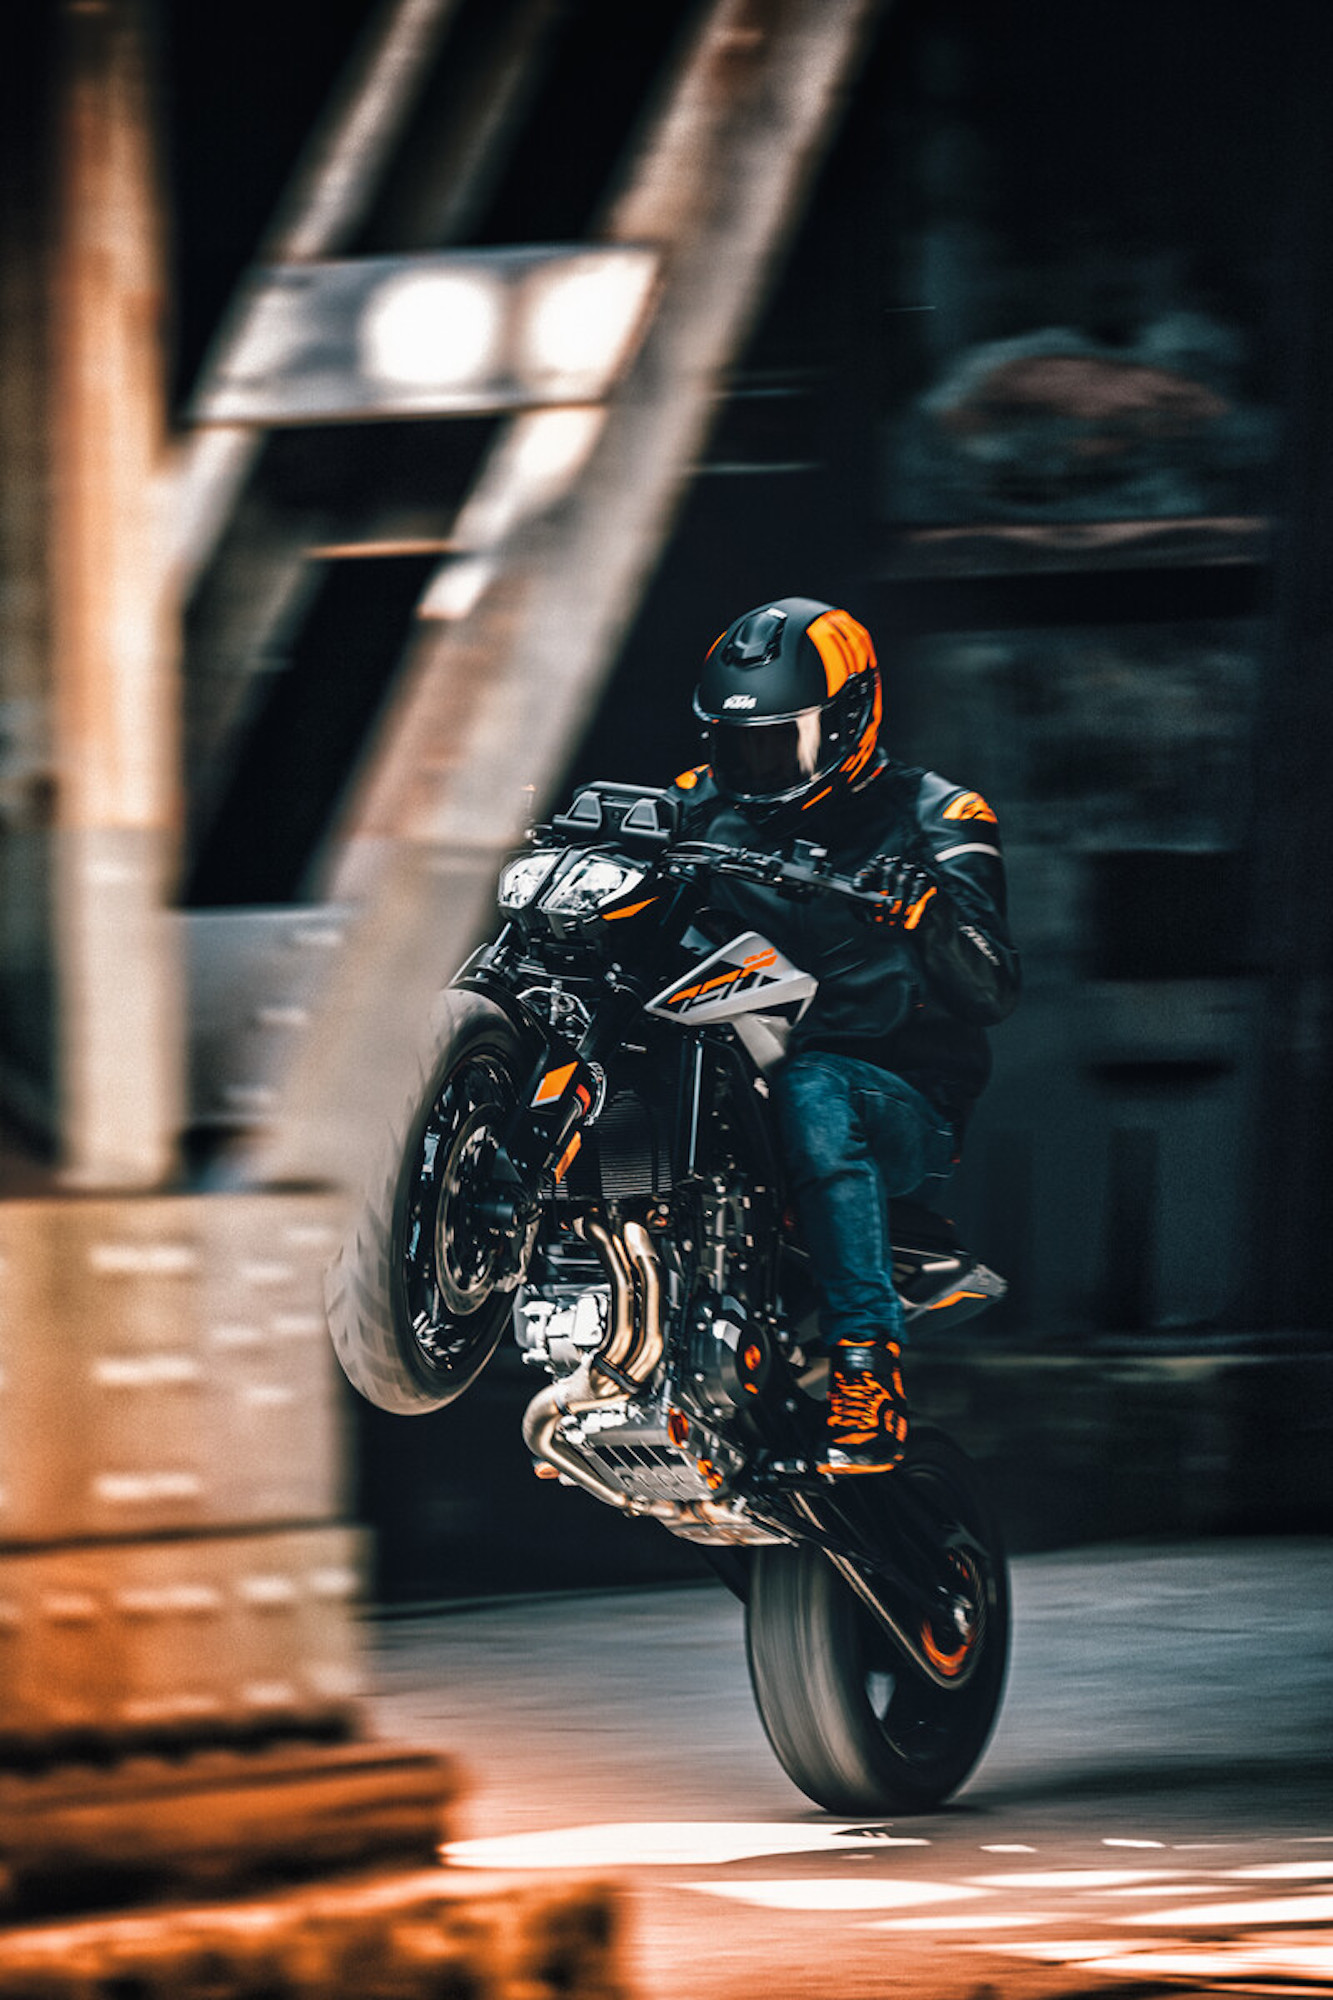 the 2023 KTM 790 Duke, which is back for the new season! Media sourced from KTM's press release. 